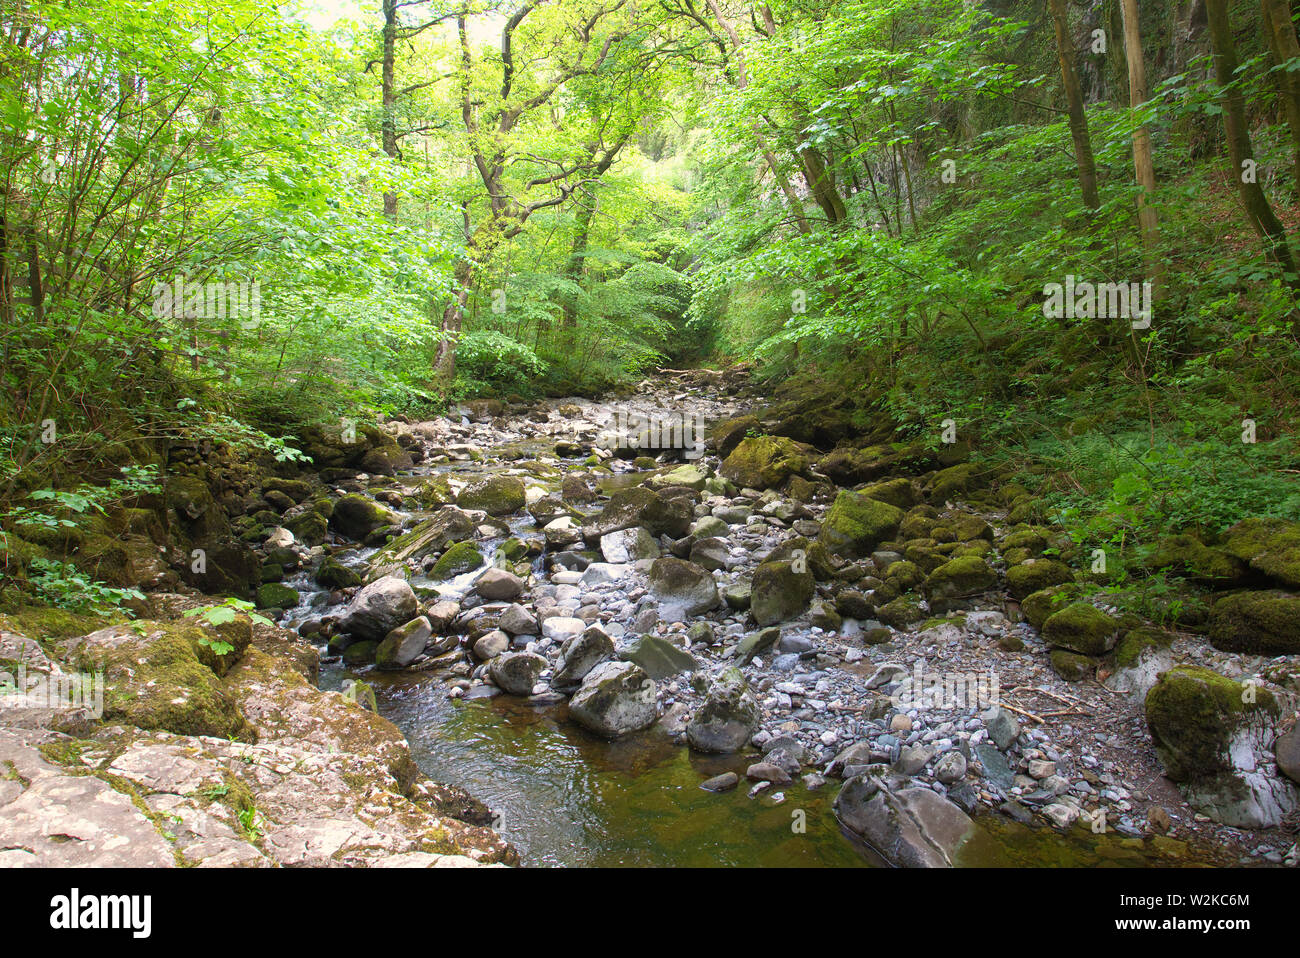 A river passing through a wooded valley in the North Yorkshire Dales. Stock Photo